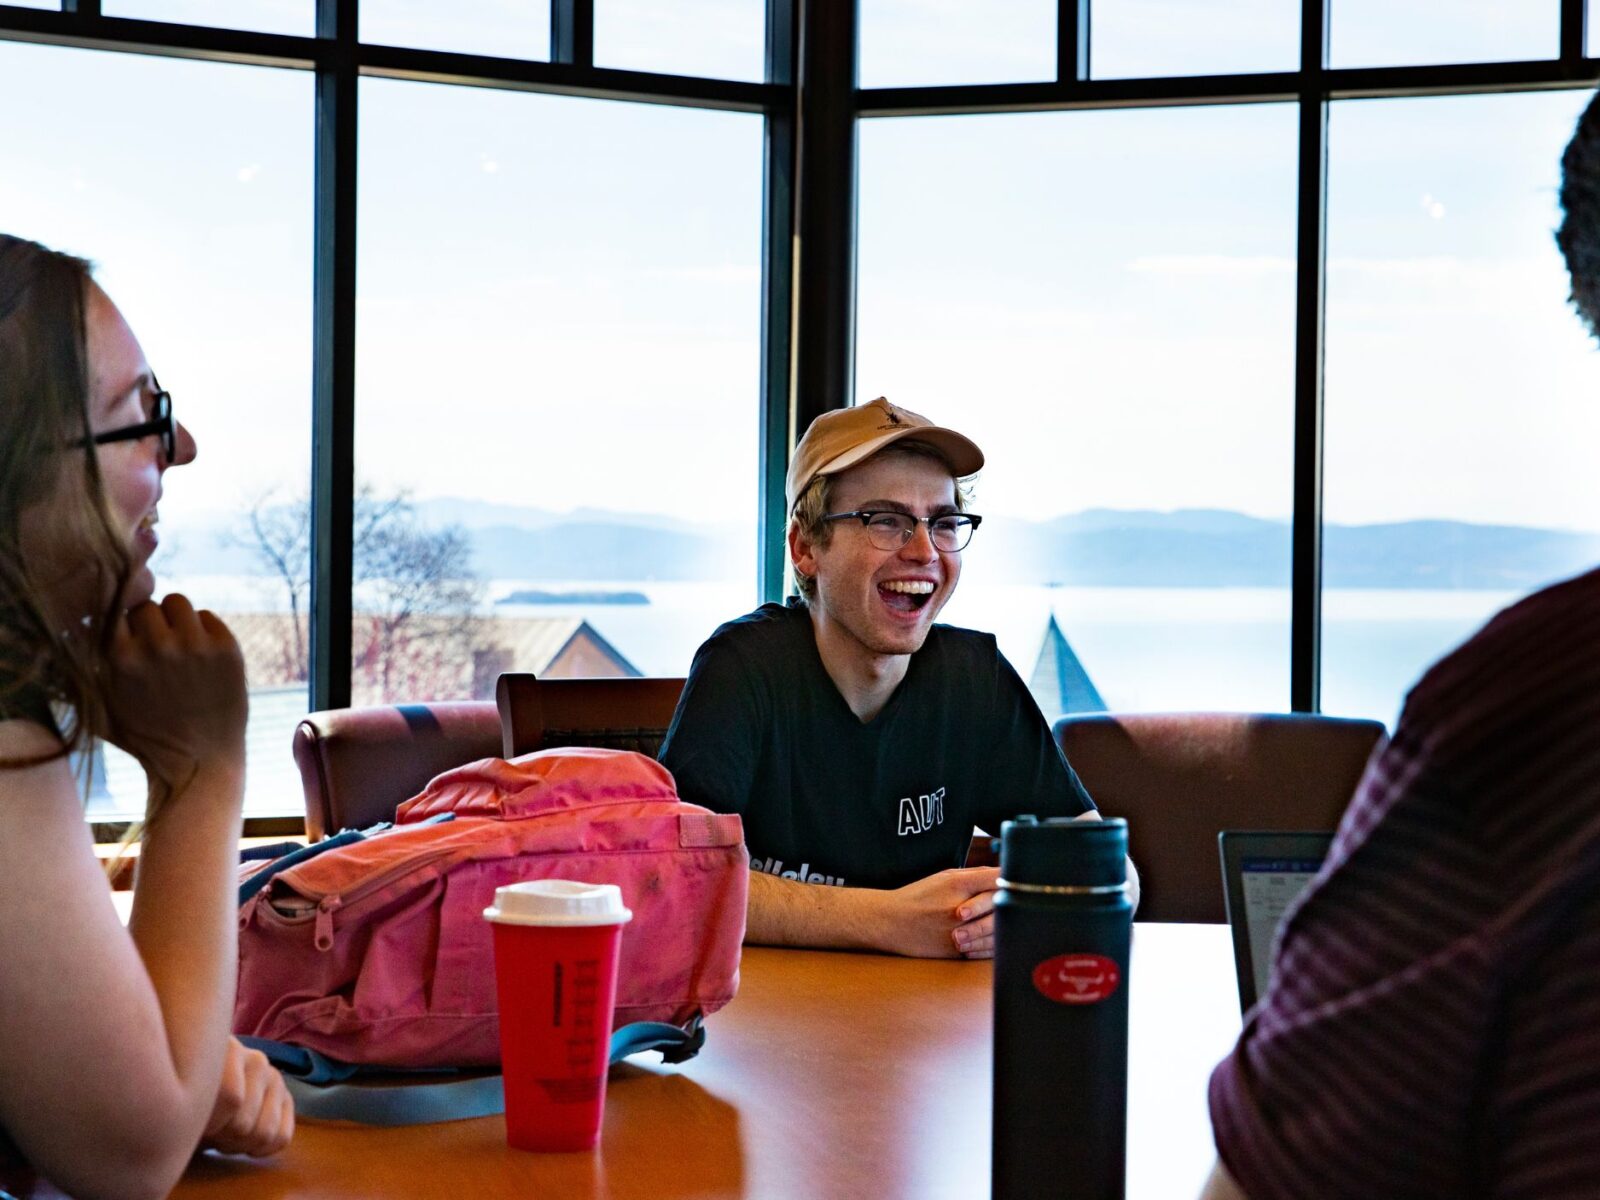 Students laughing in the vista room of the library on campus